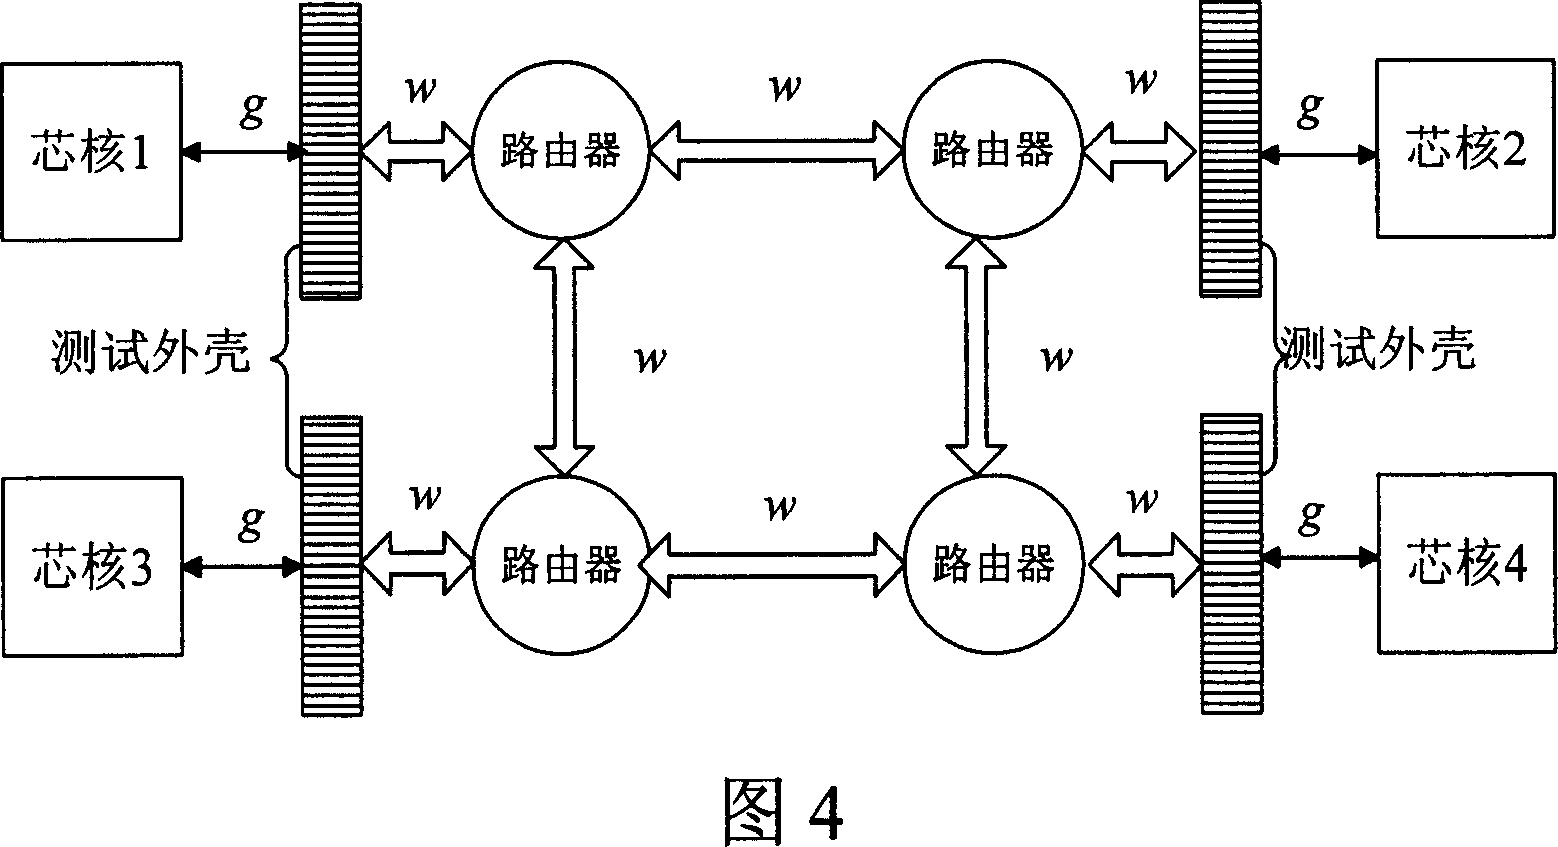 A test shell circuit and its design method